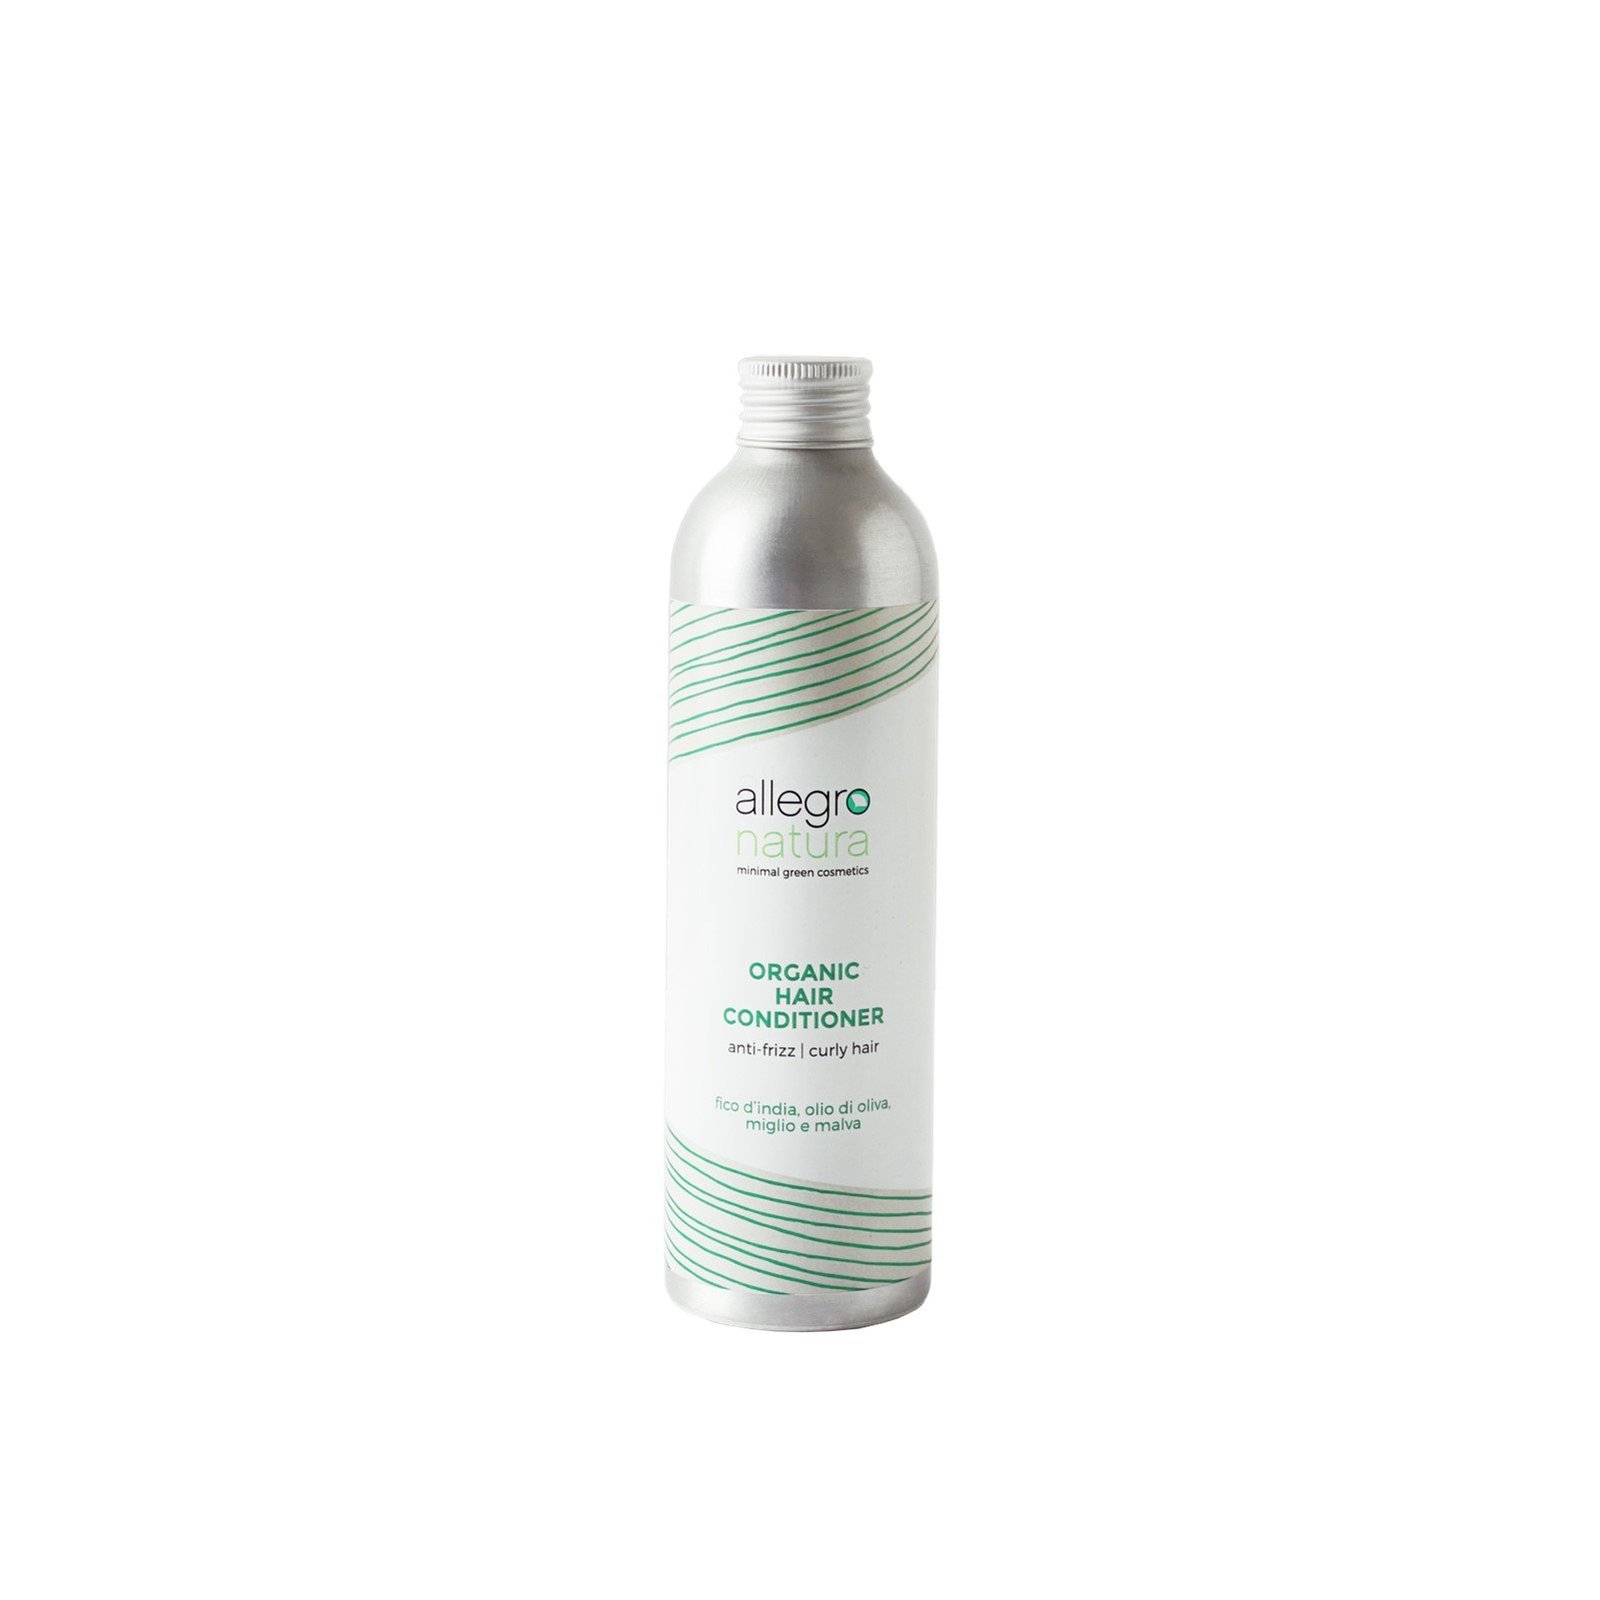 Allegro Natura Organic Hair Conditioner Anti-Frizz And Curly Hair 200ml